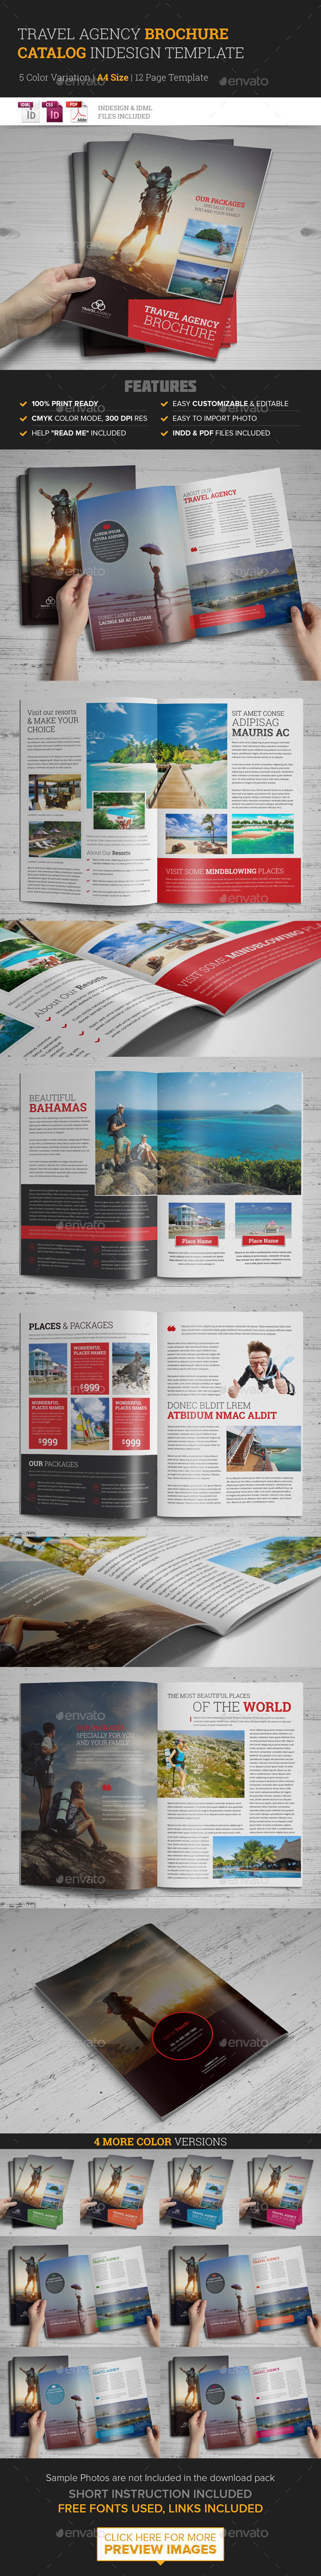 Travel Agency Brochure Catalog InDesign Template 2 (Corporate)